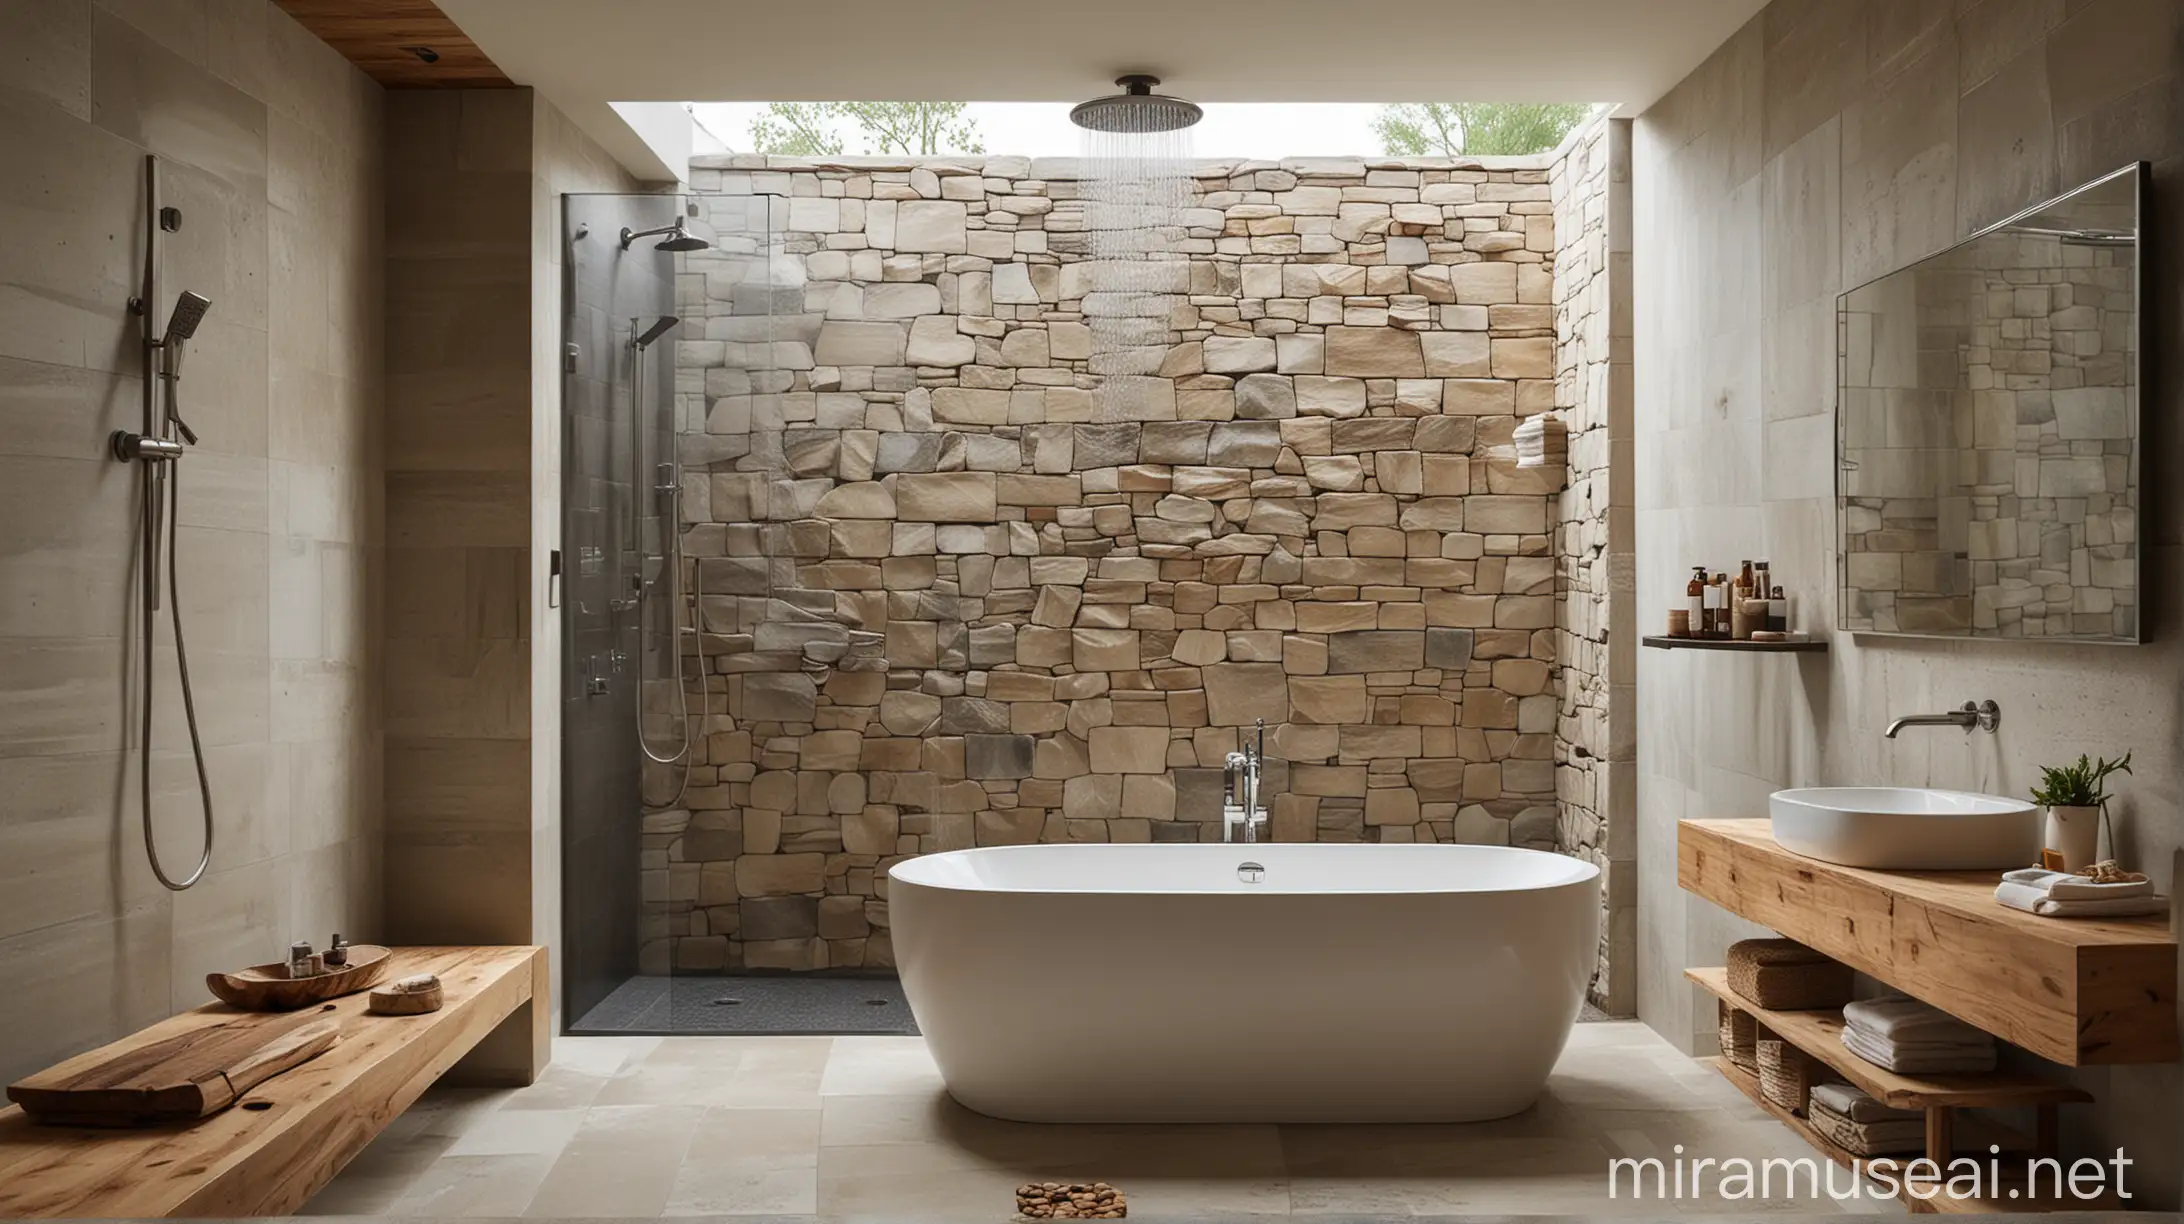 A bathroom with a minimalist design, featuring a soaking tub, a rain showerhead, and a collection of natural materials like wood and stone.